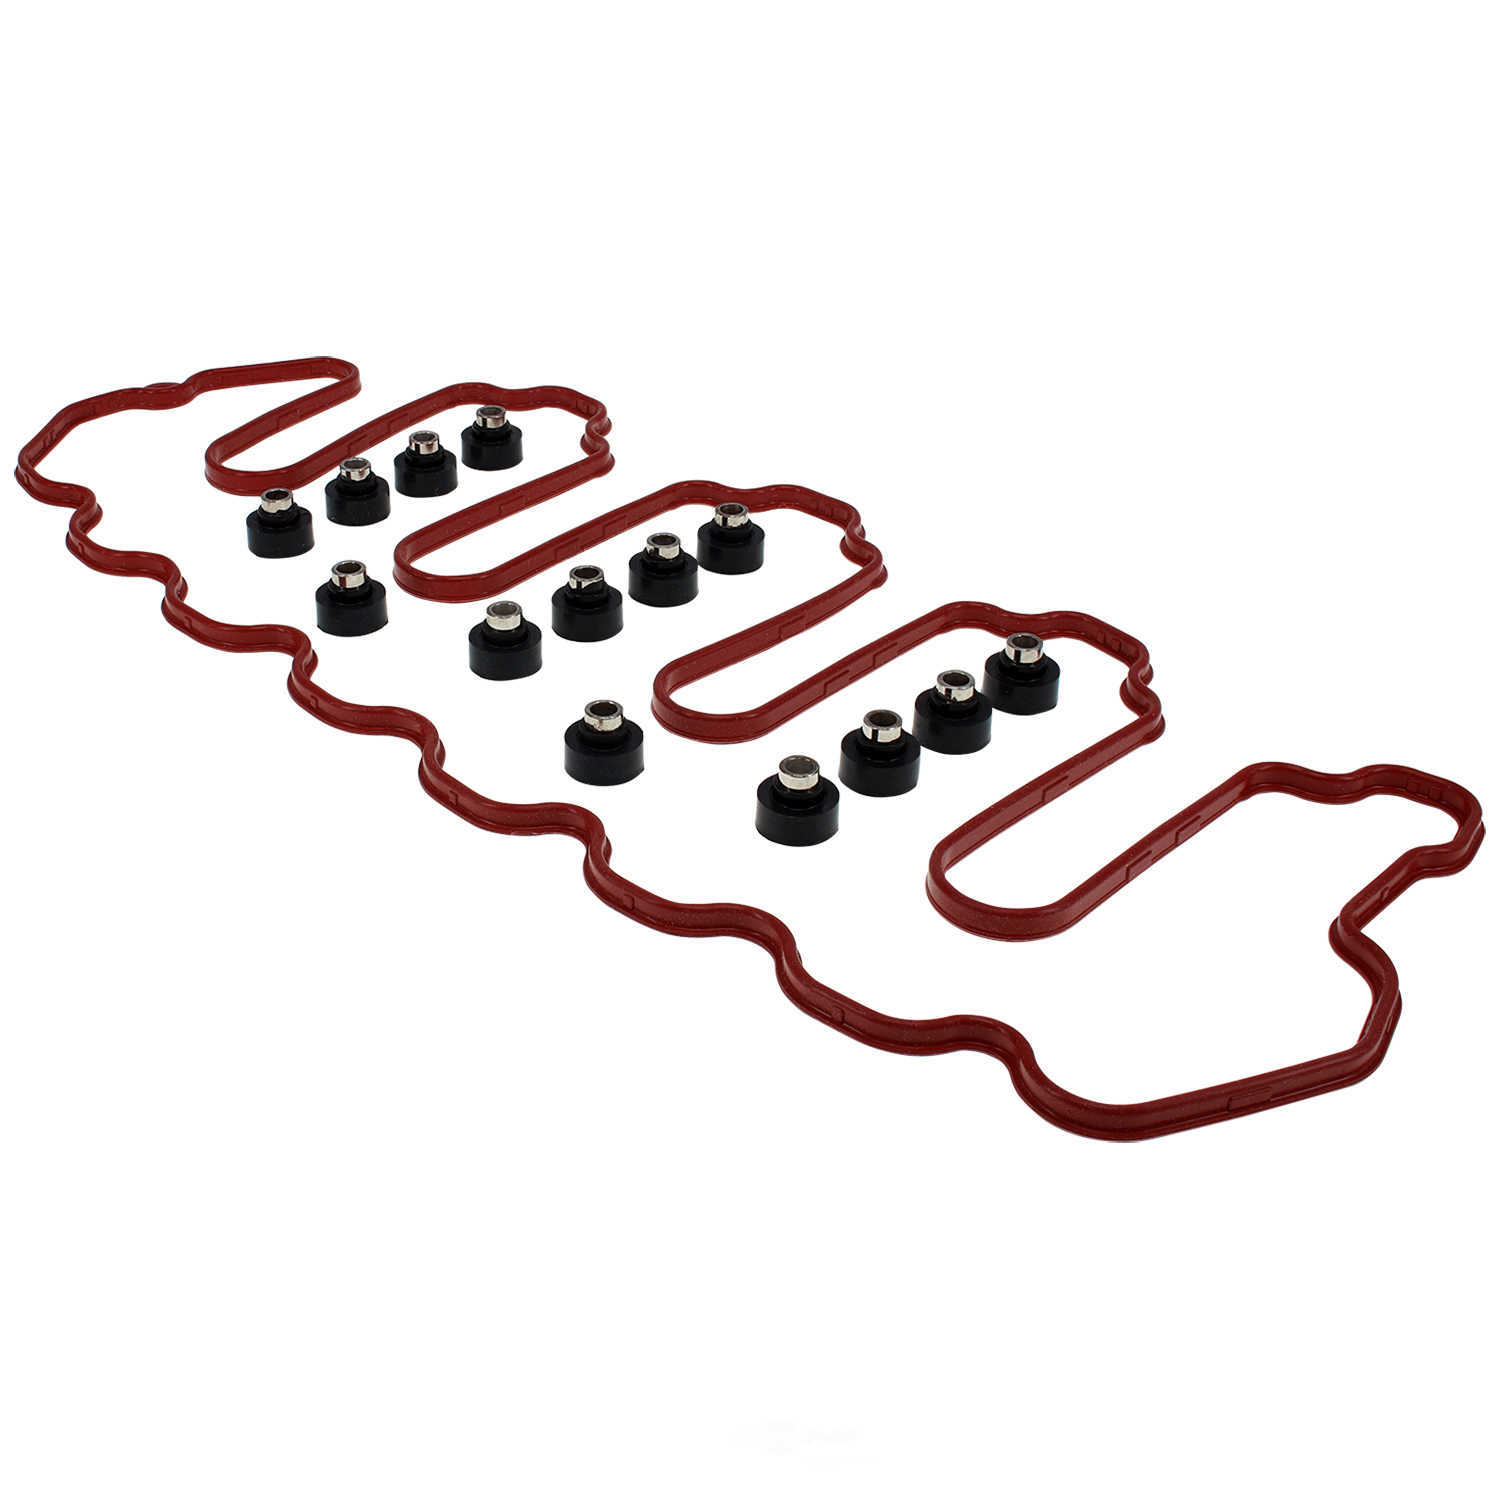 GB REMANUFACTURING INC. - Valve Cover Gasket Kit - GBR 522-036